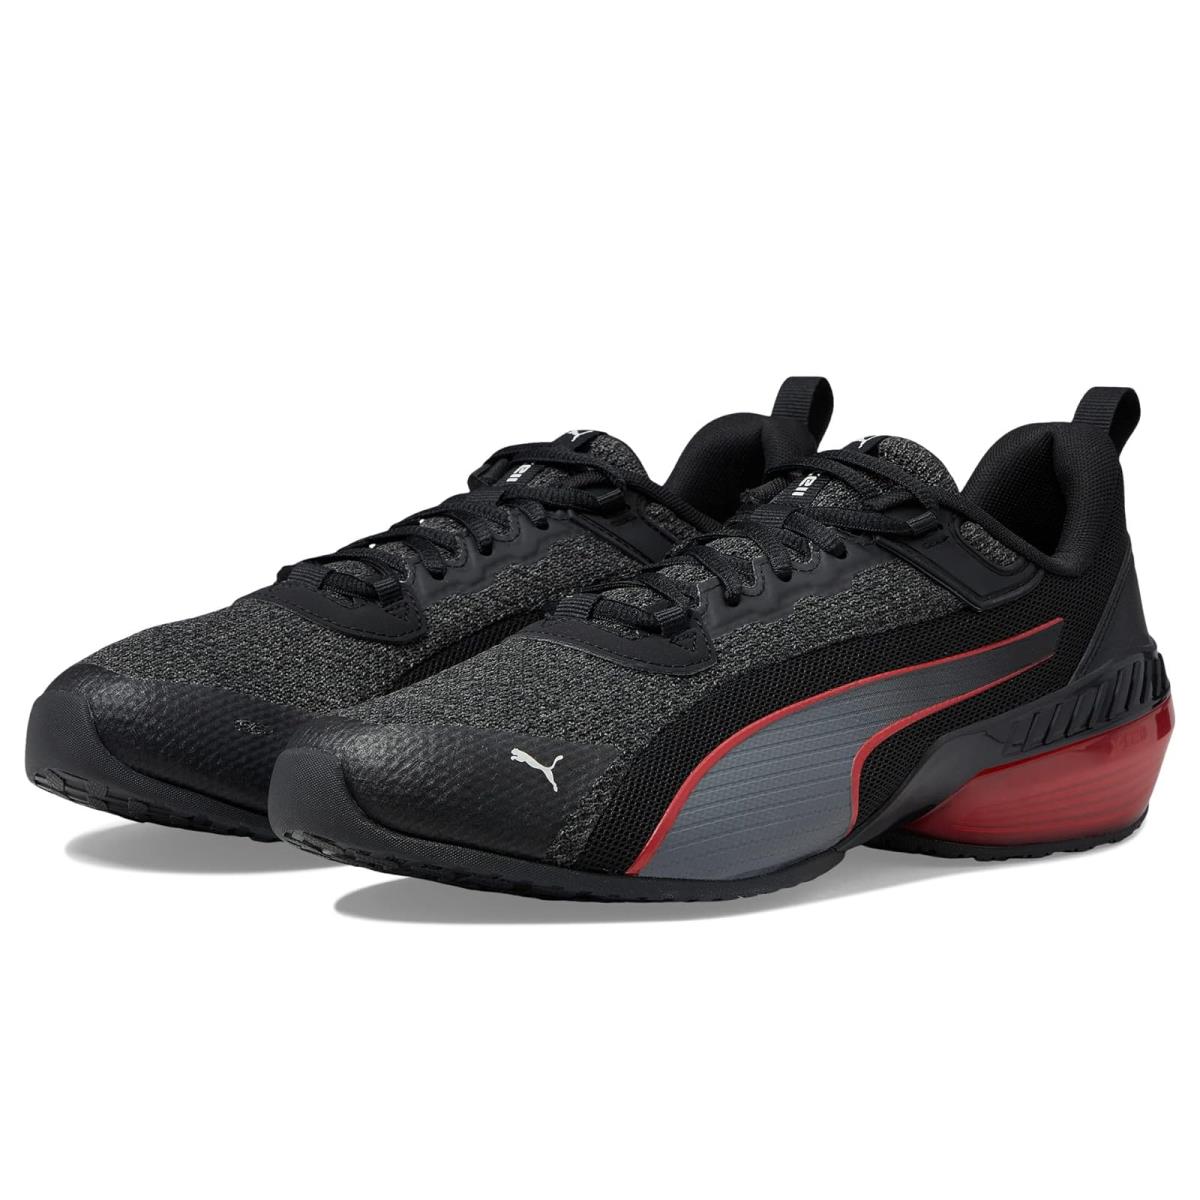 Man`s Sneakers Athletic Shoes Puma X-cell Uprise Fade Puma Black/Castlerock/High-Risk Red